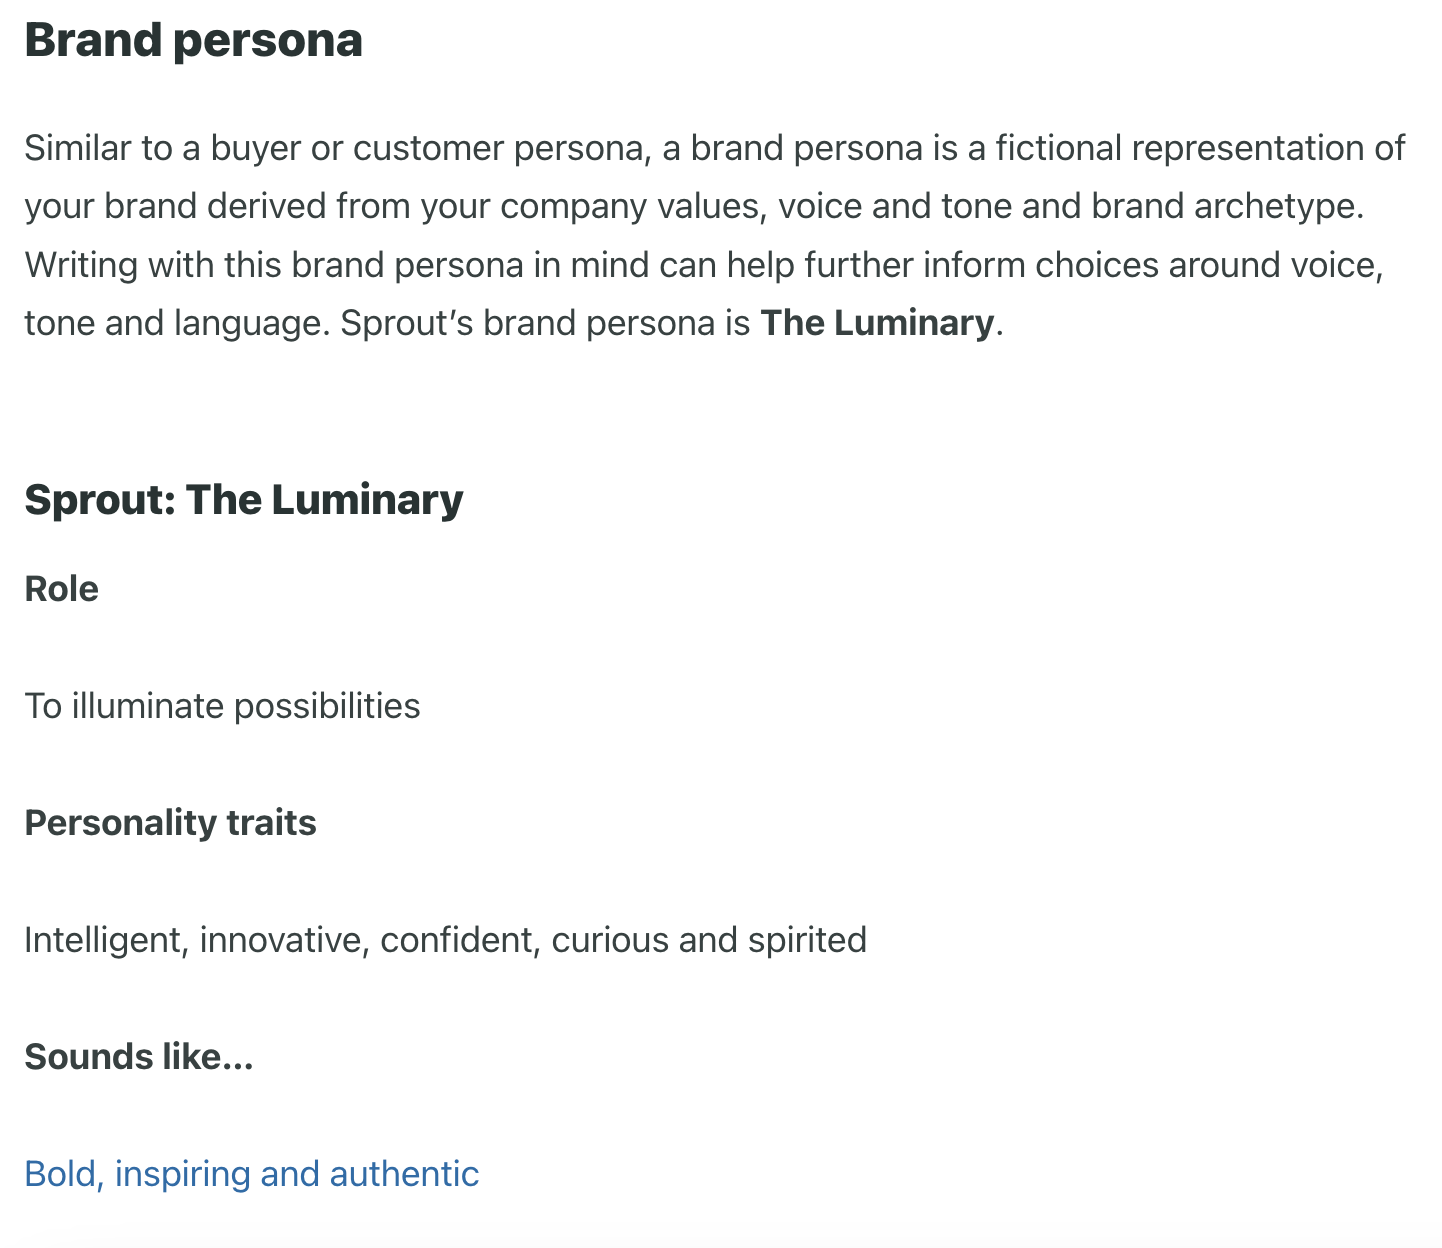 Screenshot from Sprout's Seeds brand guide describing the role, personality traits and sound of the Luminary brand persona. 